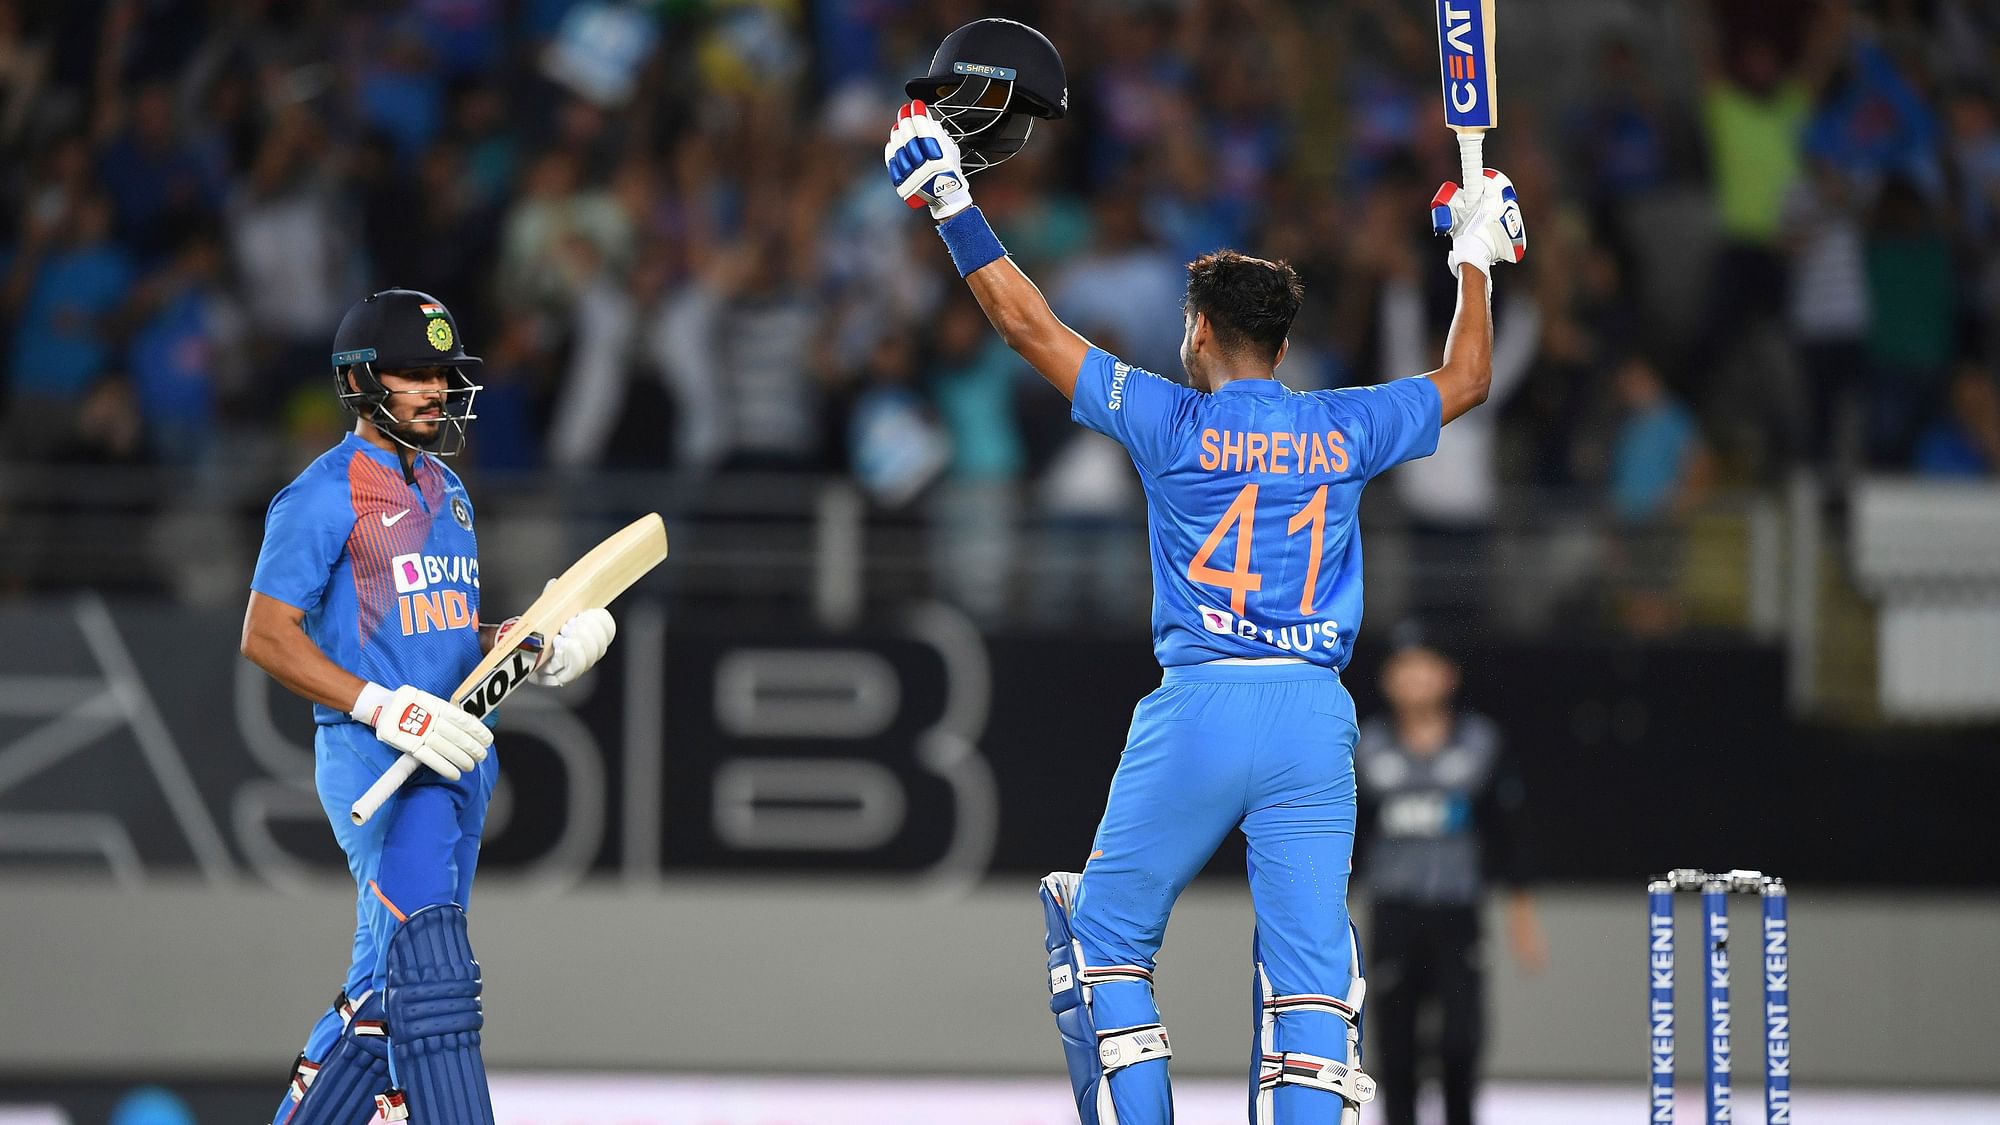 With this win in the series opener in Auckland, India take a 1-0 lead against New Zealand in the five-match T20I series.